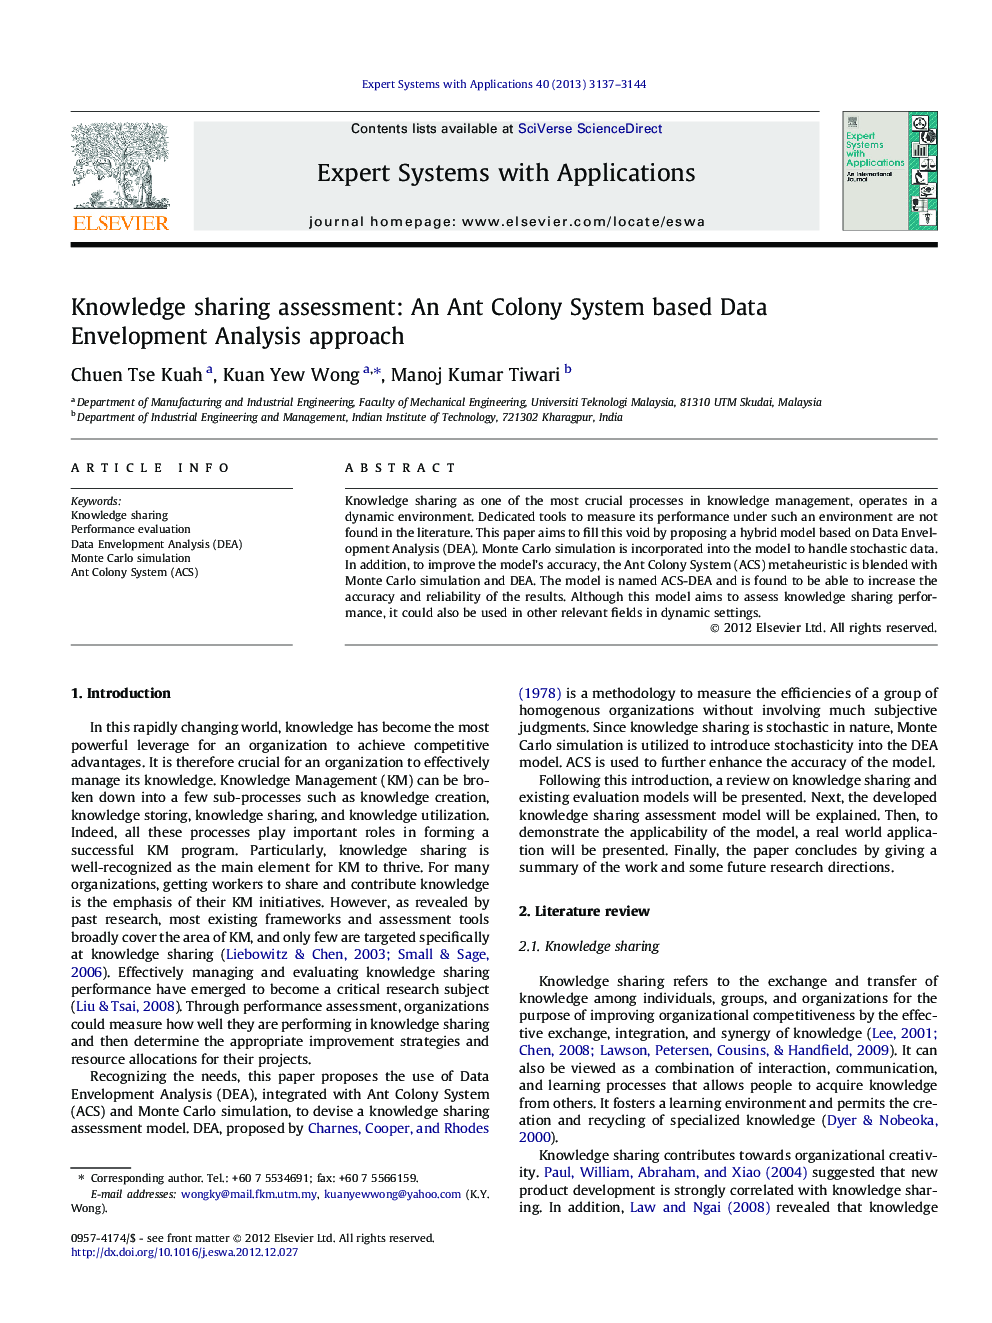 Knowledge sharing assessment: An Ant Colony System based Data Envelopment Analysis approach